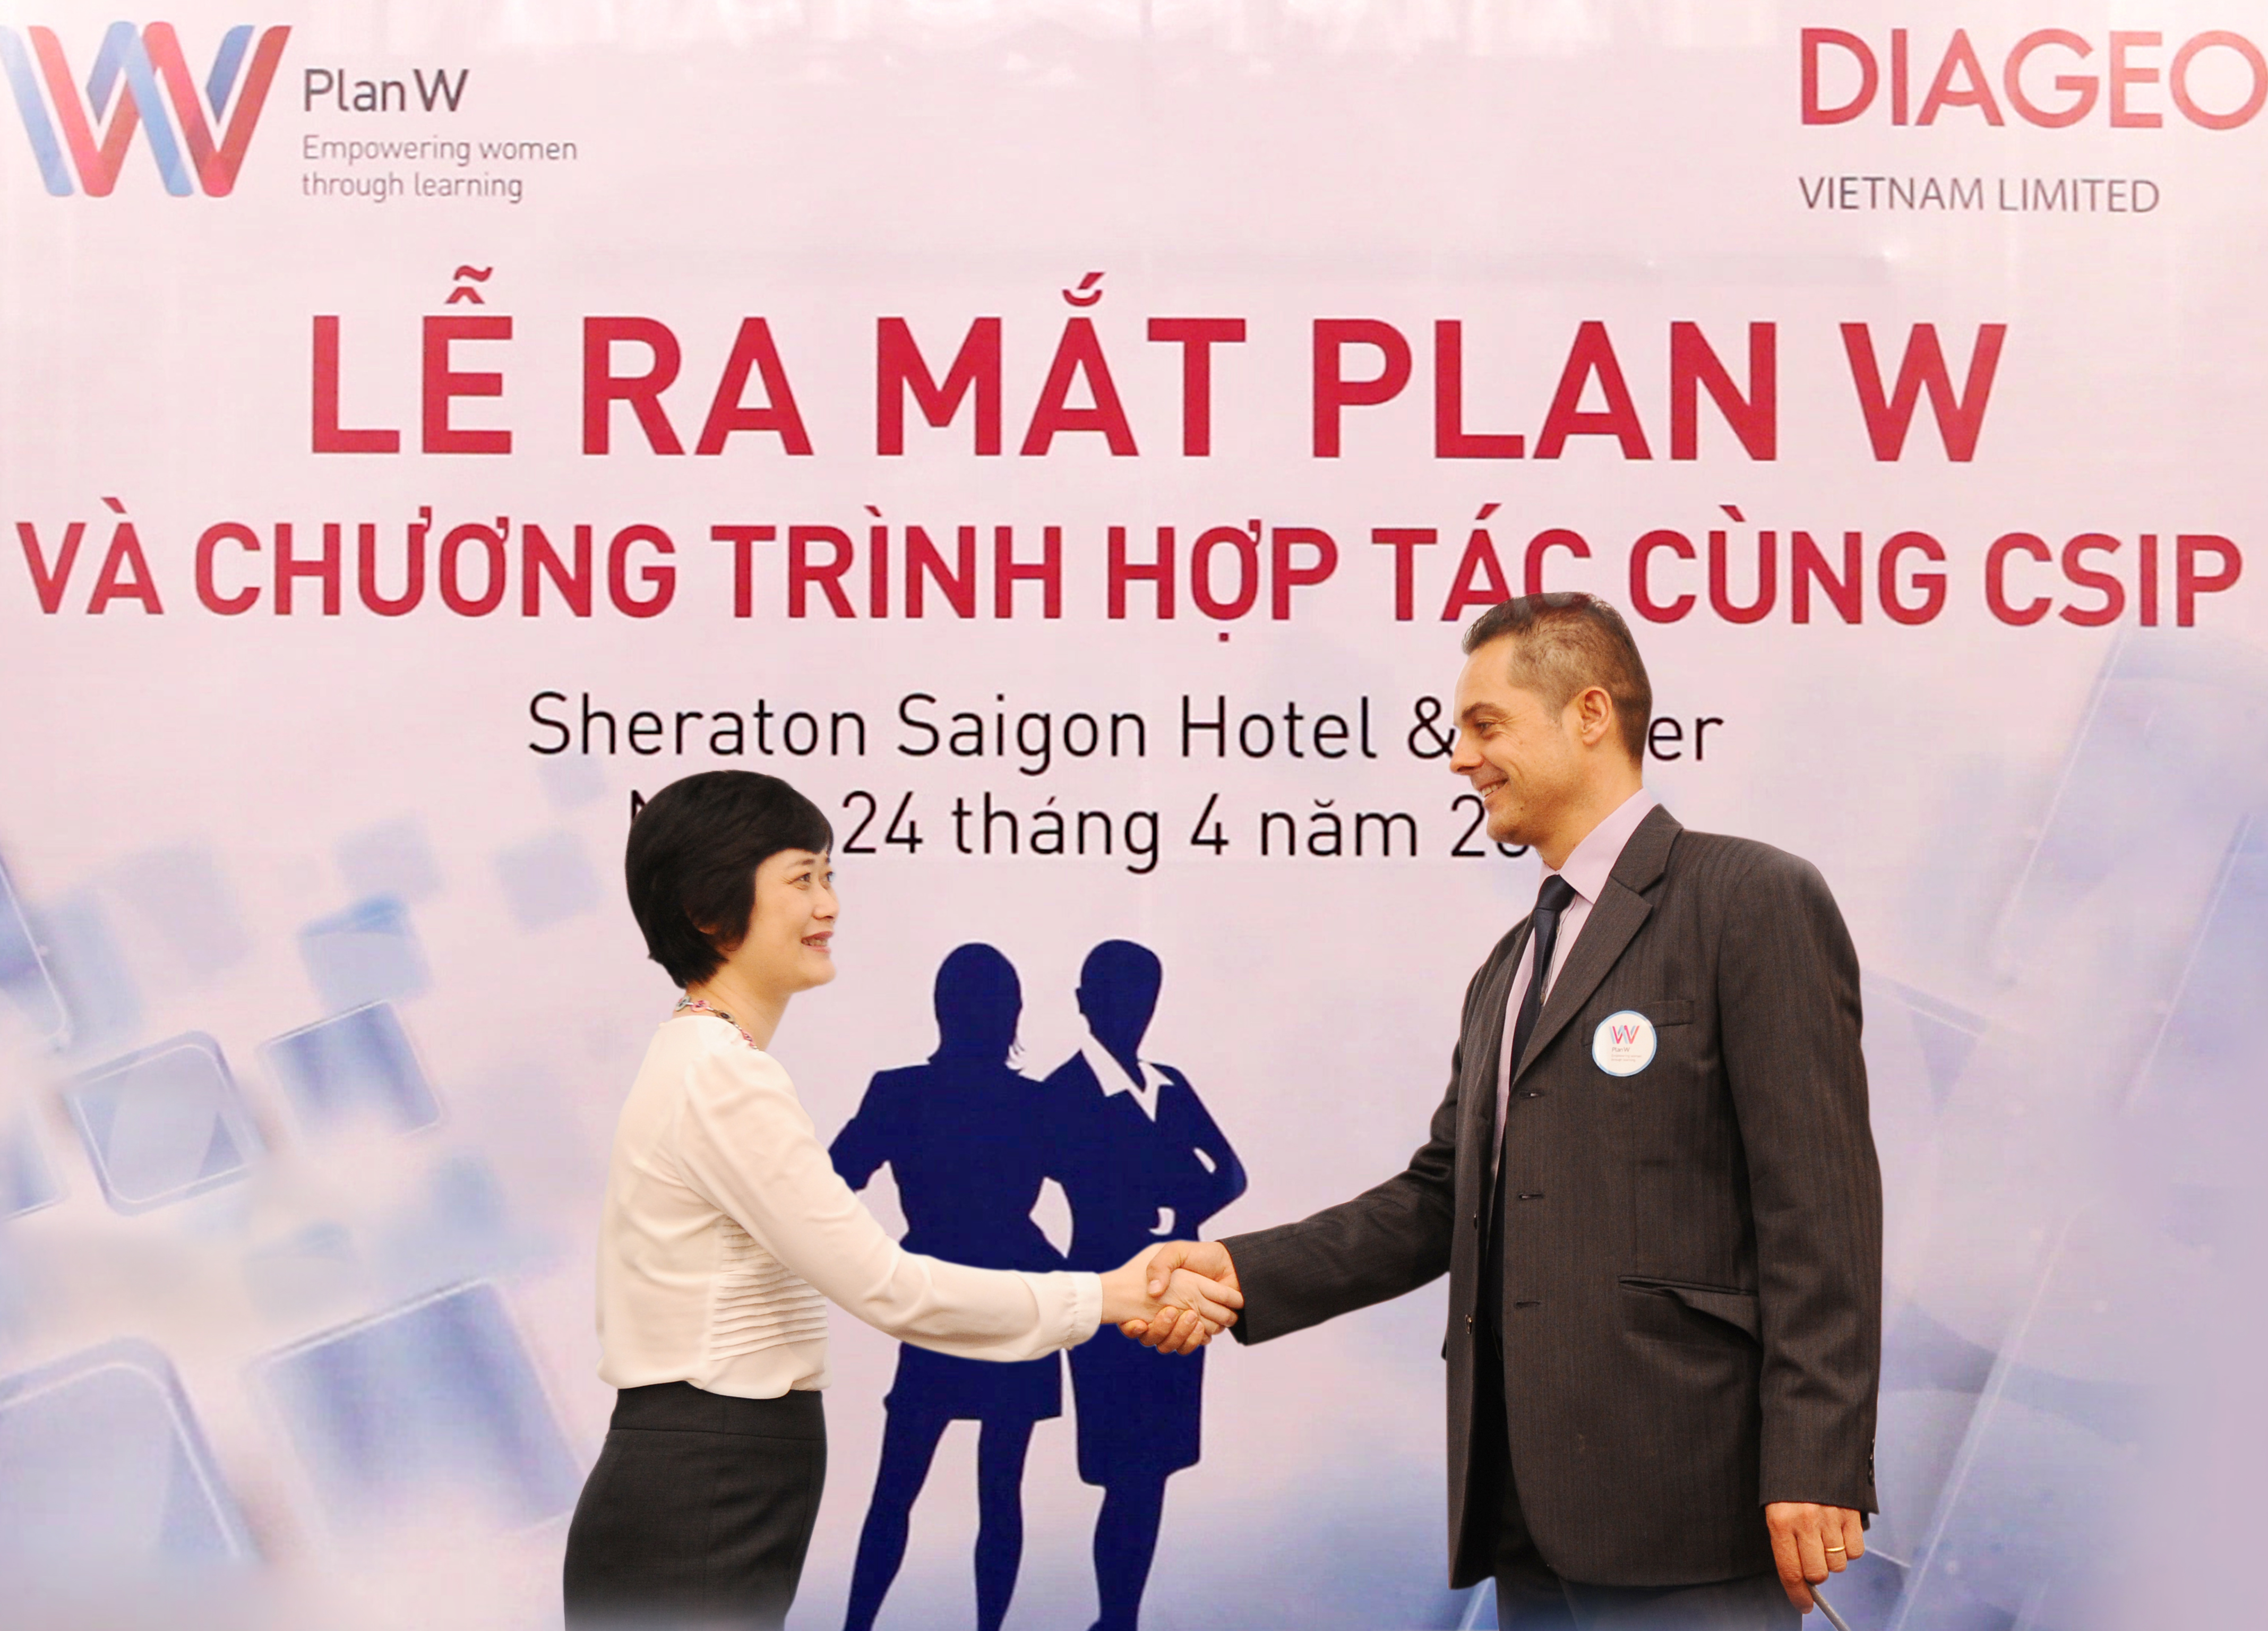 Plan W: A double value from investment in community